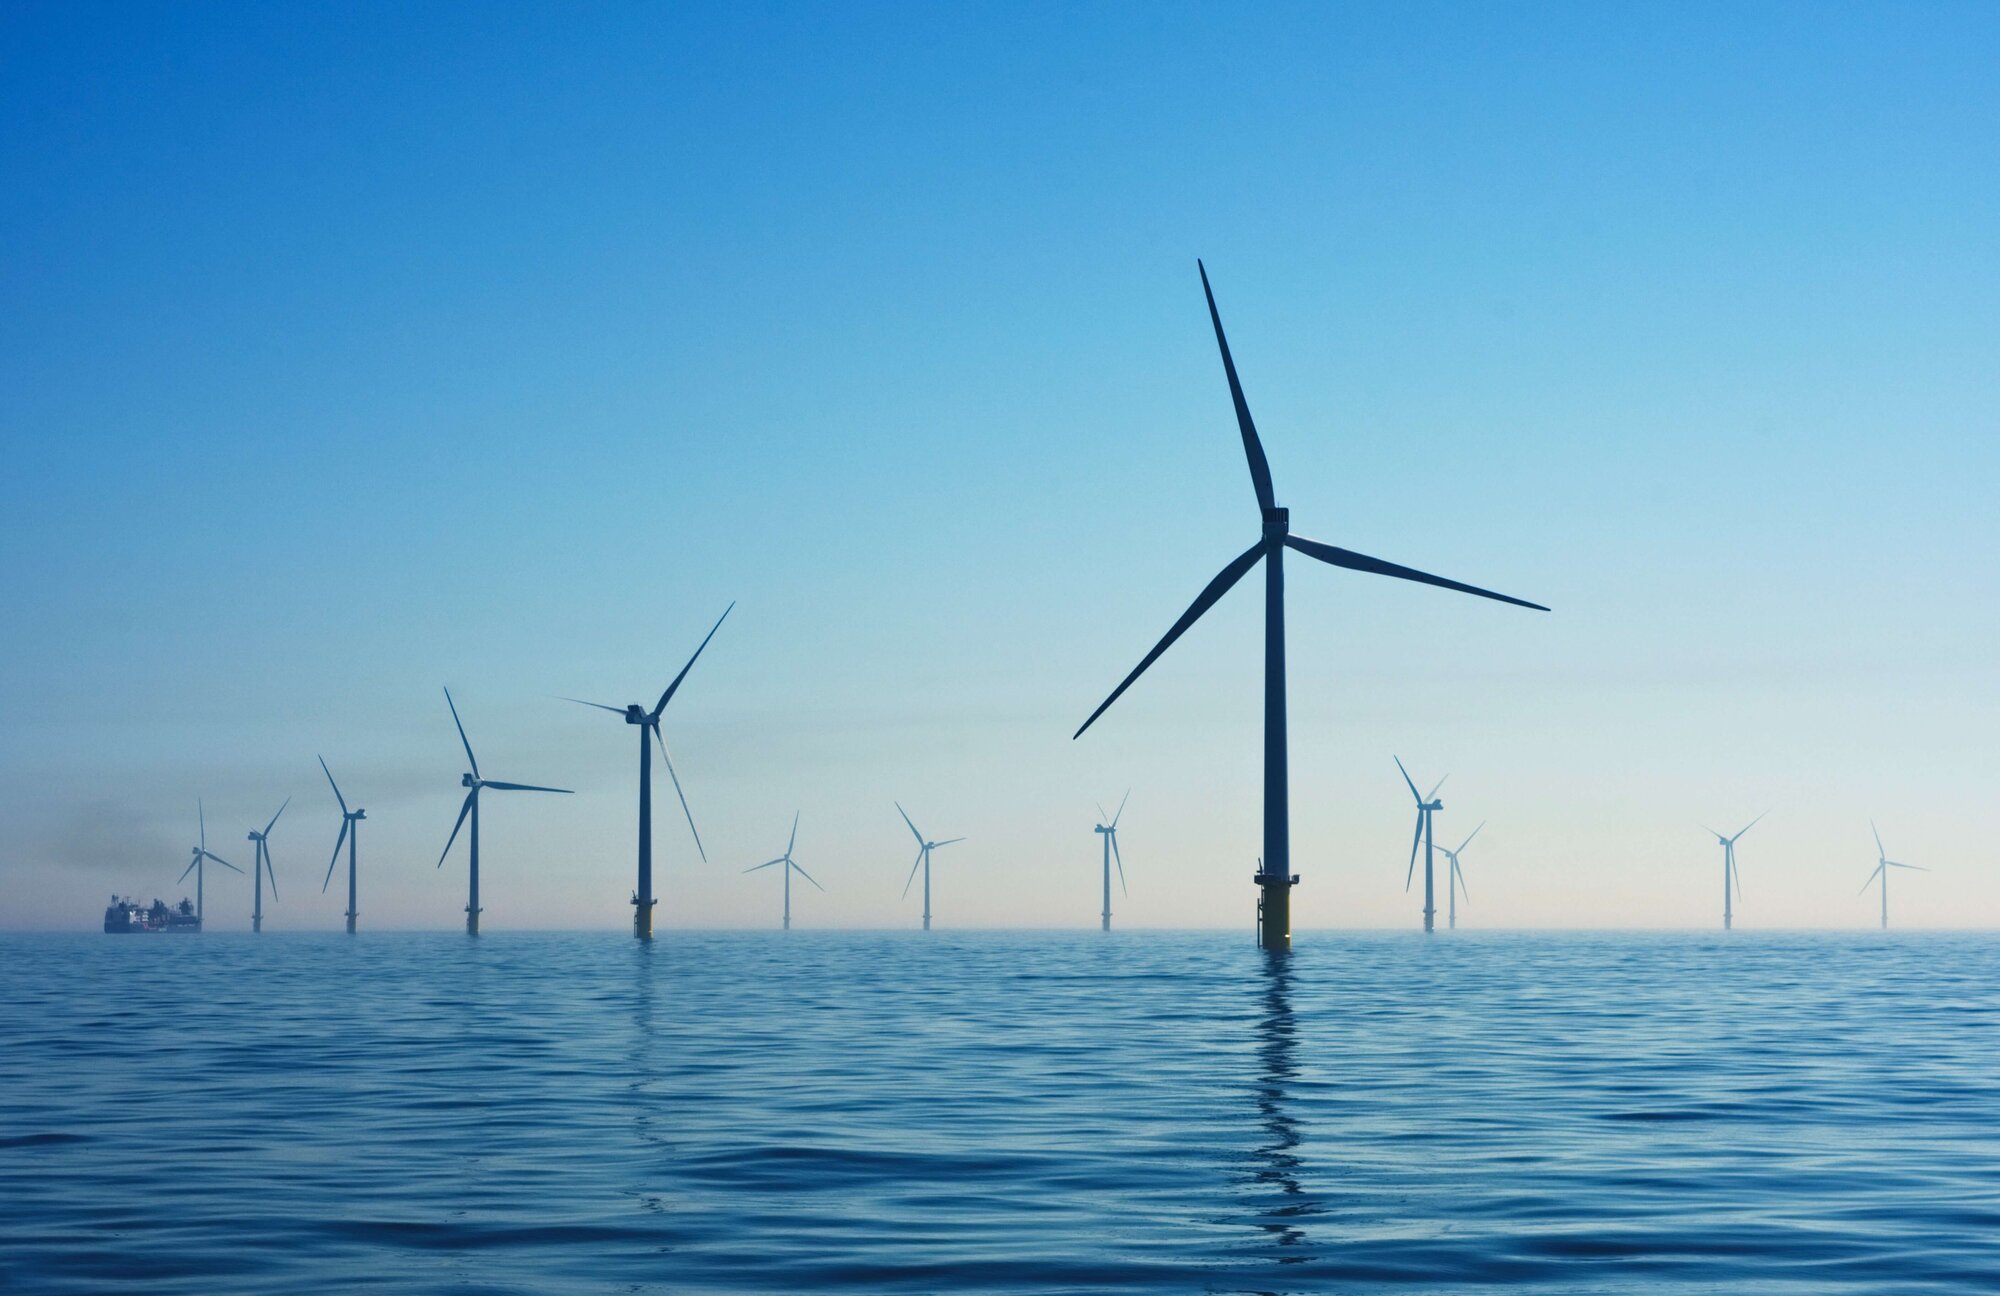 various off-shore wind turbines in the sea, blue sky and sea surface